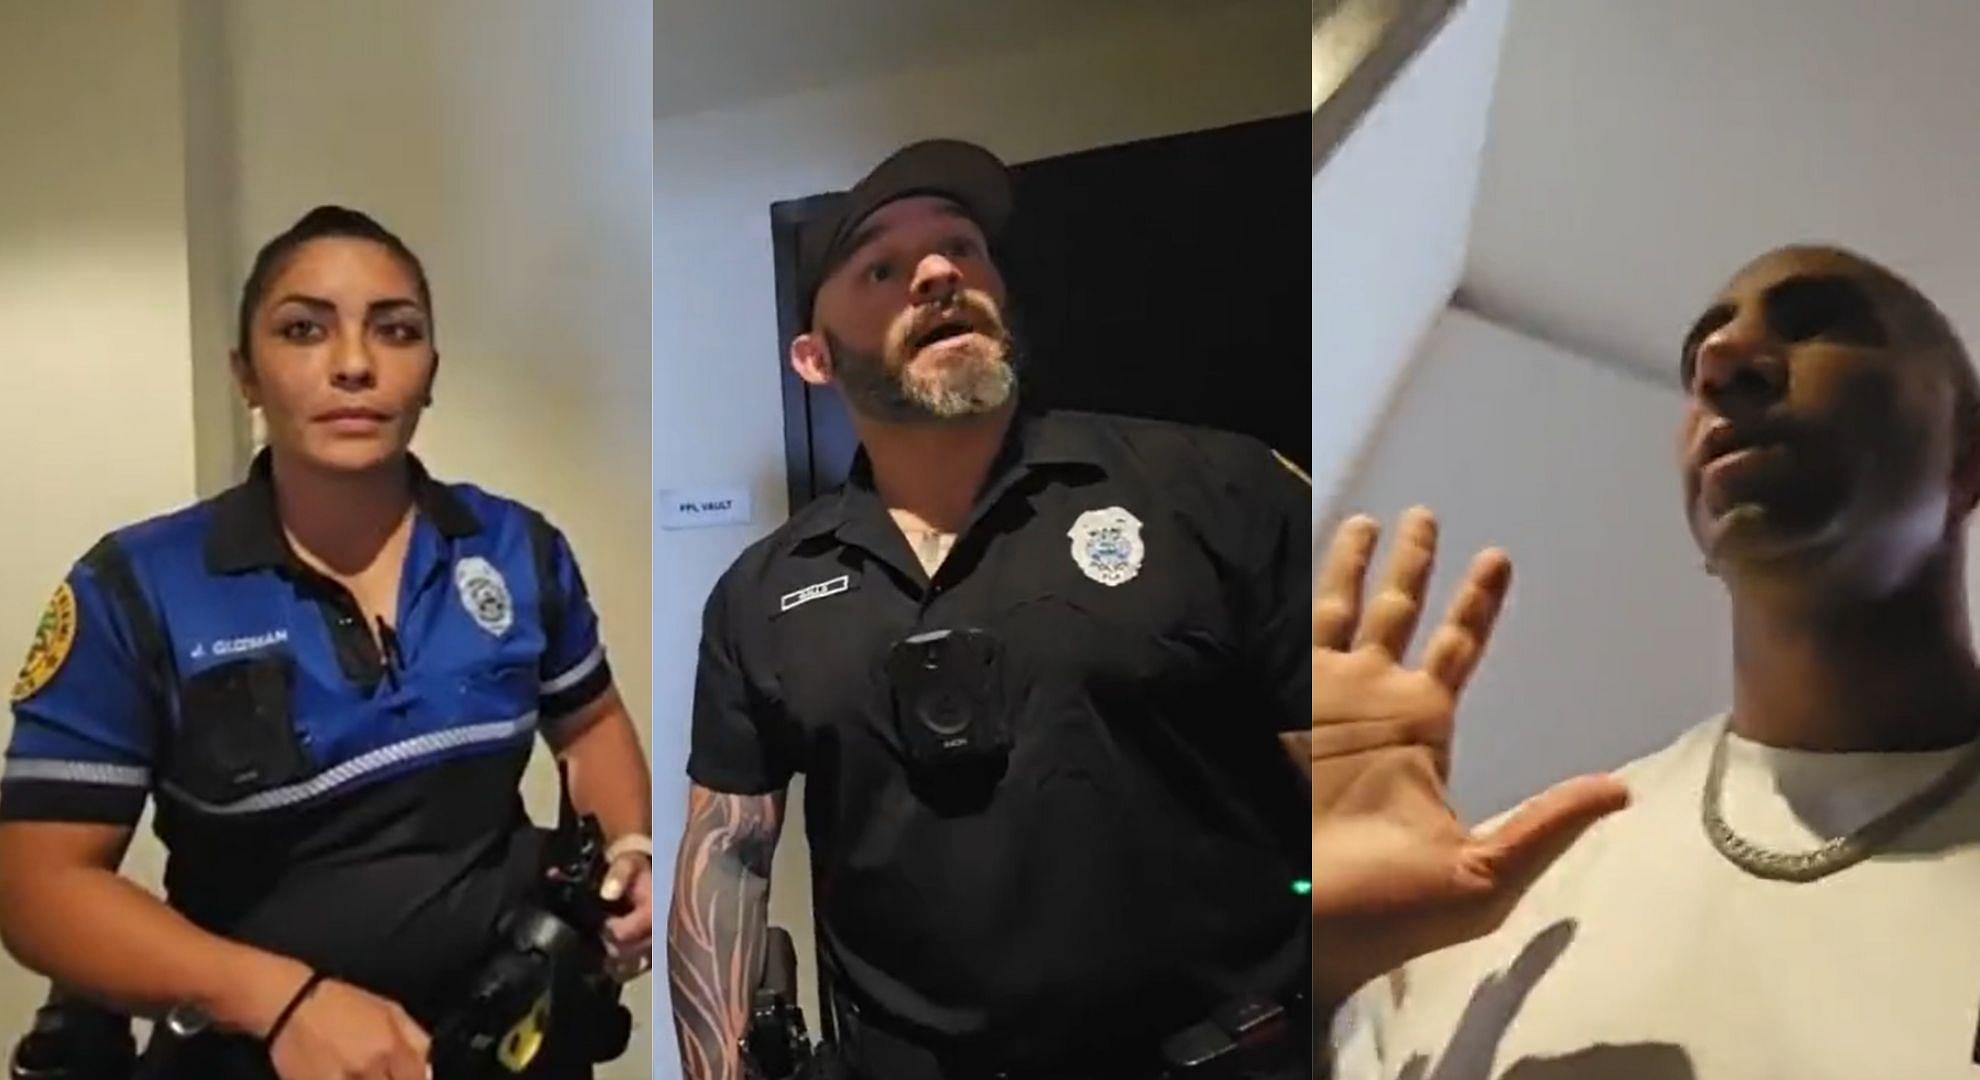 Fousey and Sneako swatted on stream while community share their thoughts